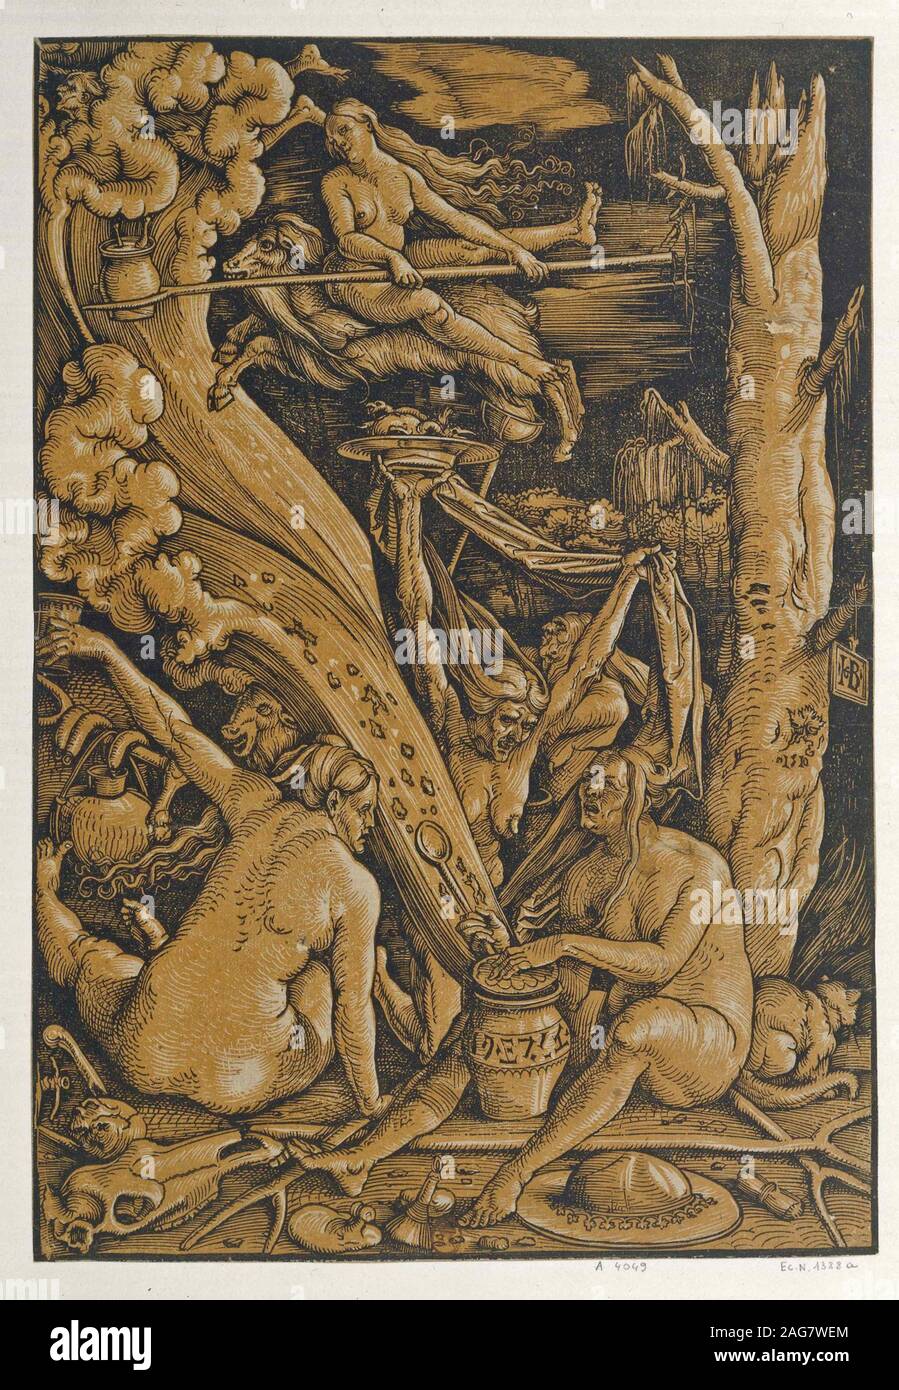 Witches, 1510. Found in the Collection of Biblioth&#xe8;que Nationale de France. Stock Photo